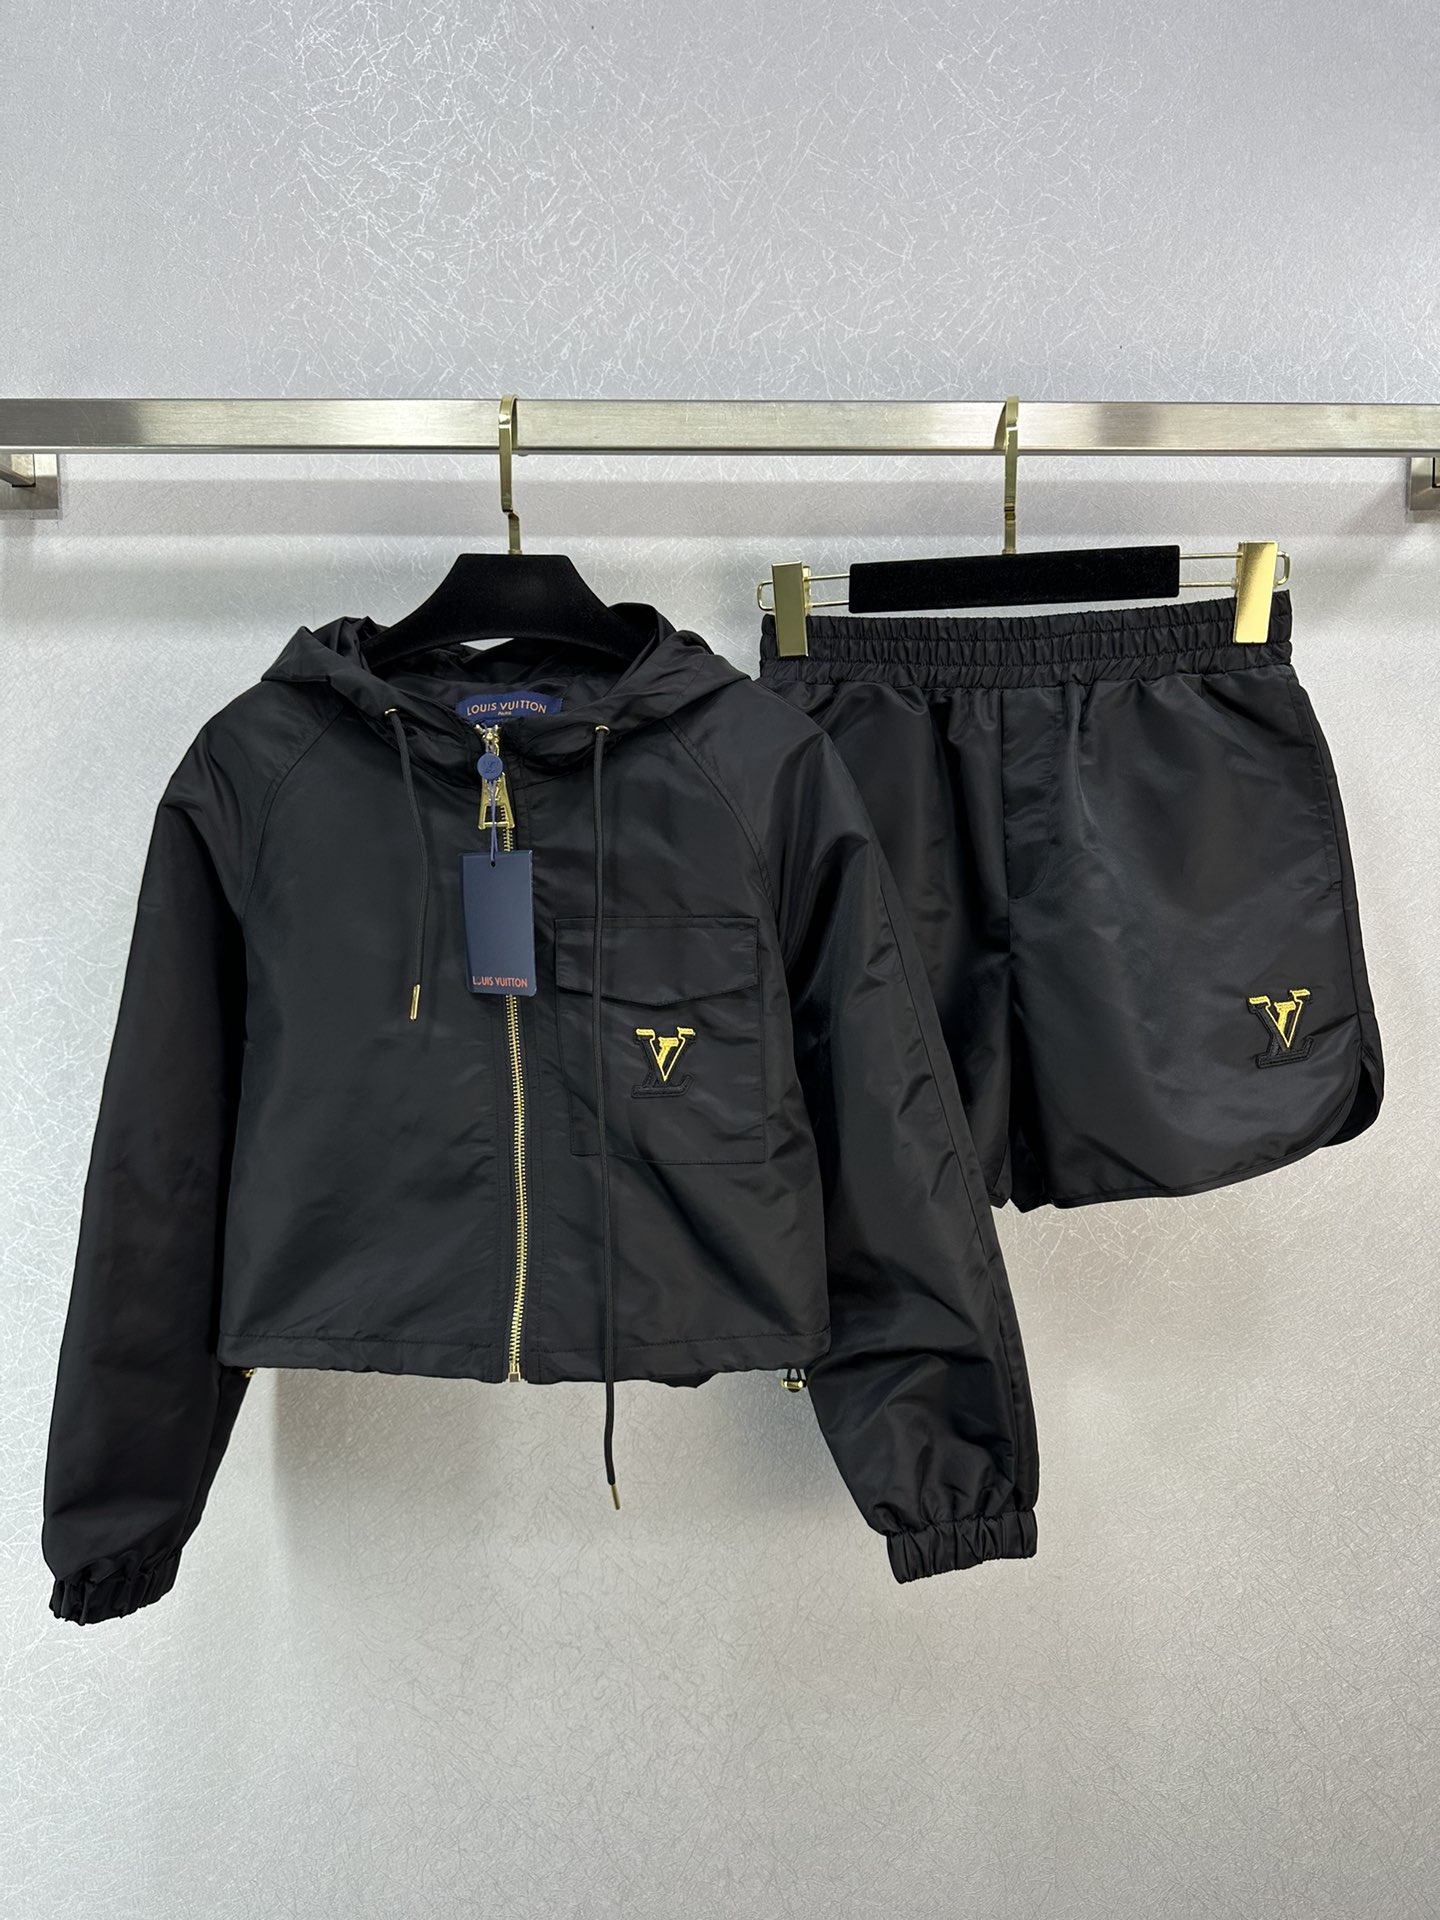 Buy best quality Replica
 Louis Vuitton Top
 Clothing Coats & Jackets Shorts Two Piece Outfits & Matching Sets Summer Collection Hooded Top